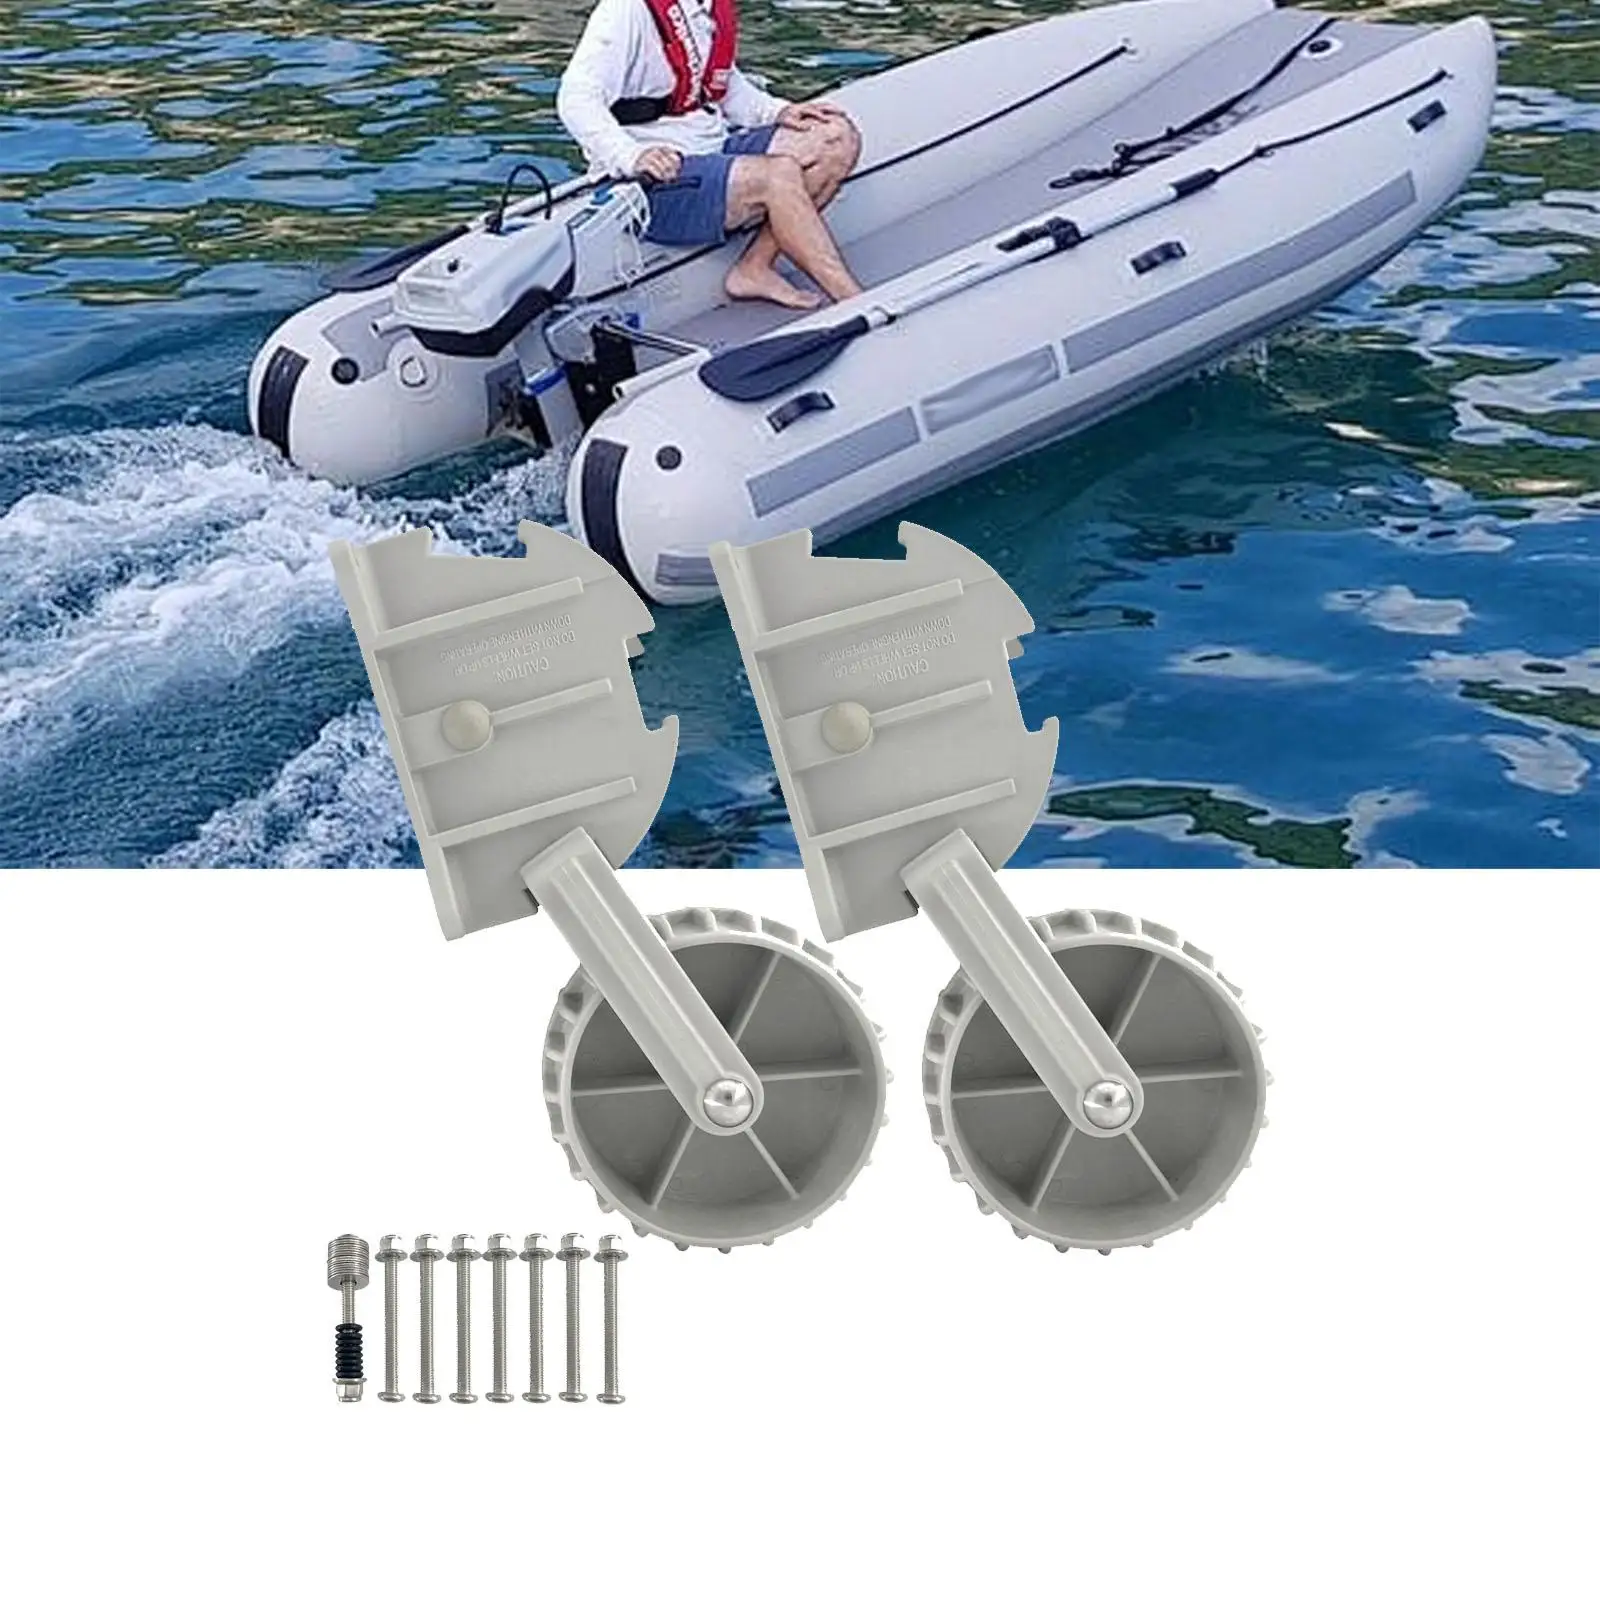 

2Pcs Dinghy Wheels Inflatable Boat Launching Wheels for Rubber Boats